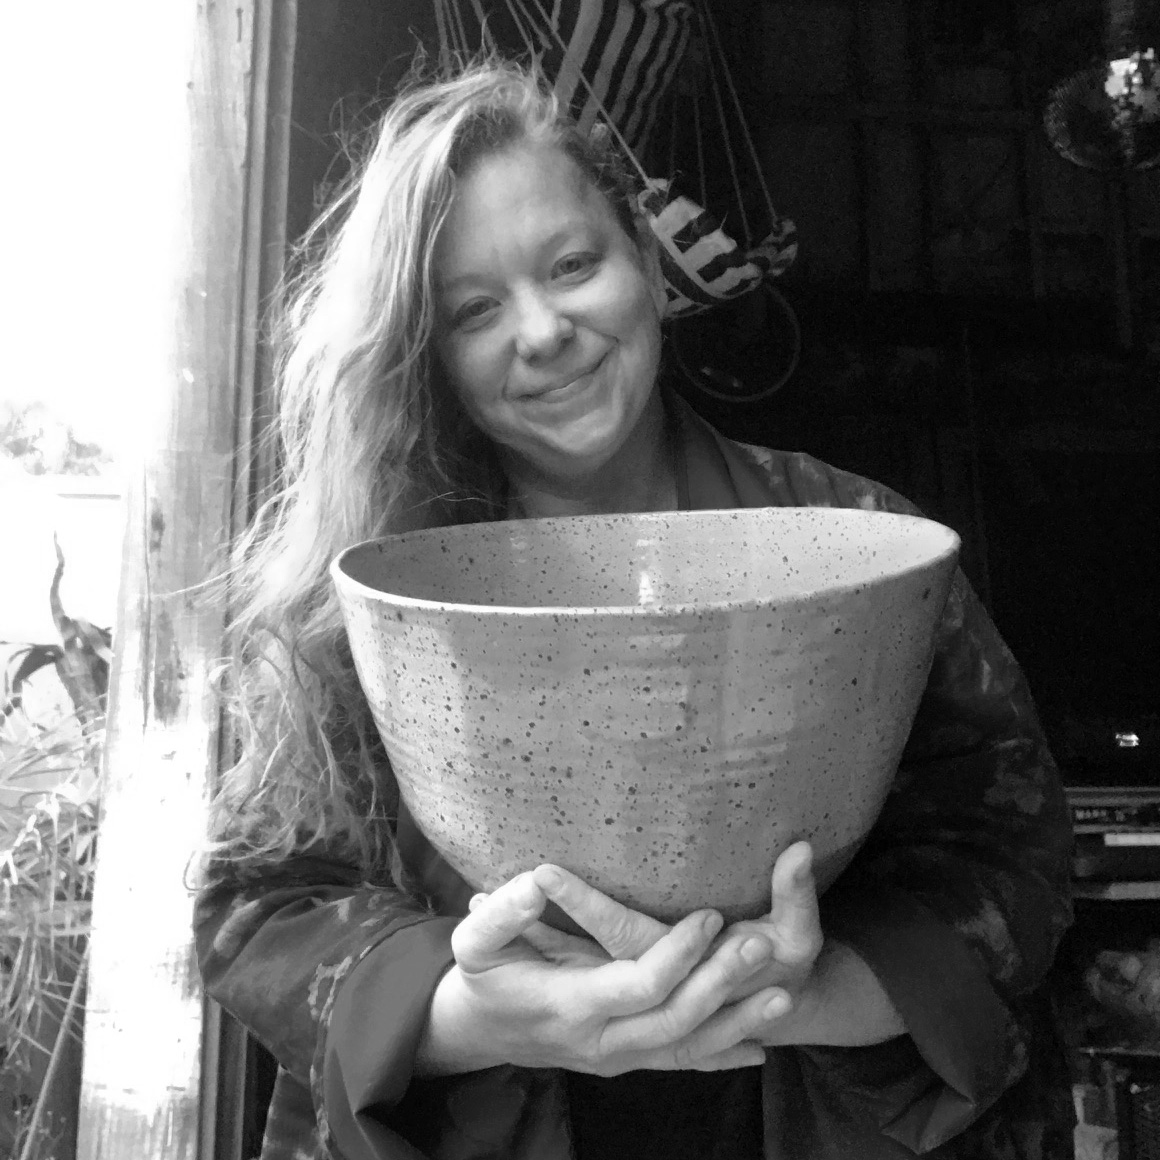 Image of Nicole, a cis-white woman with long hair, holding a large ceramic bowl